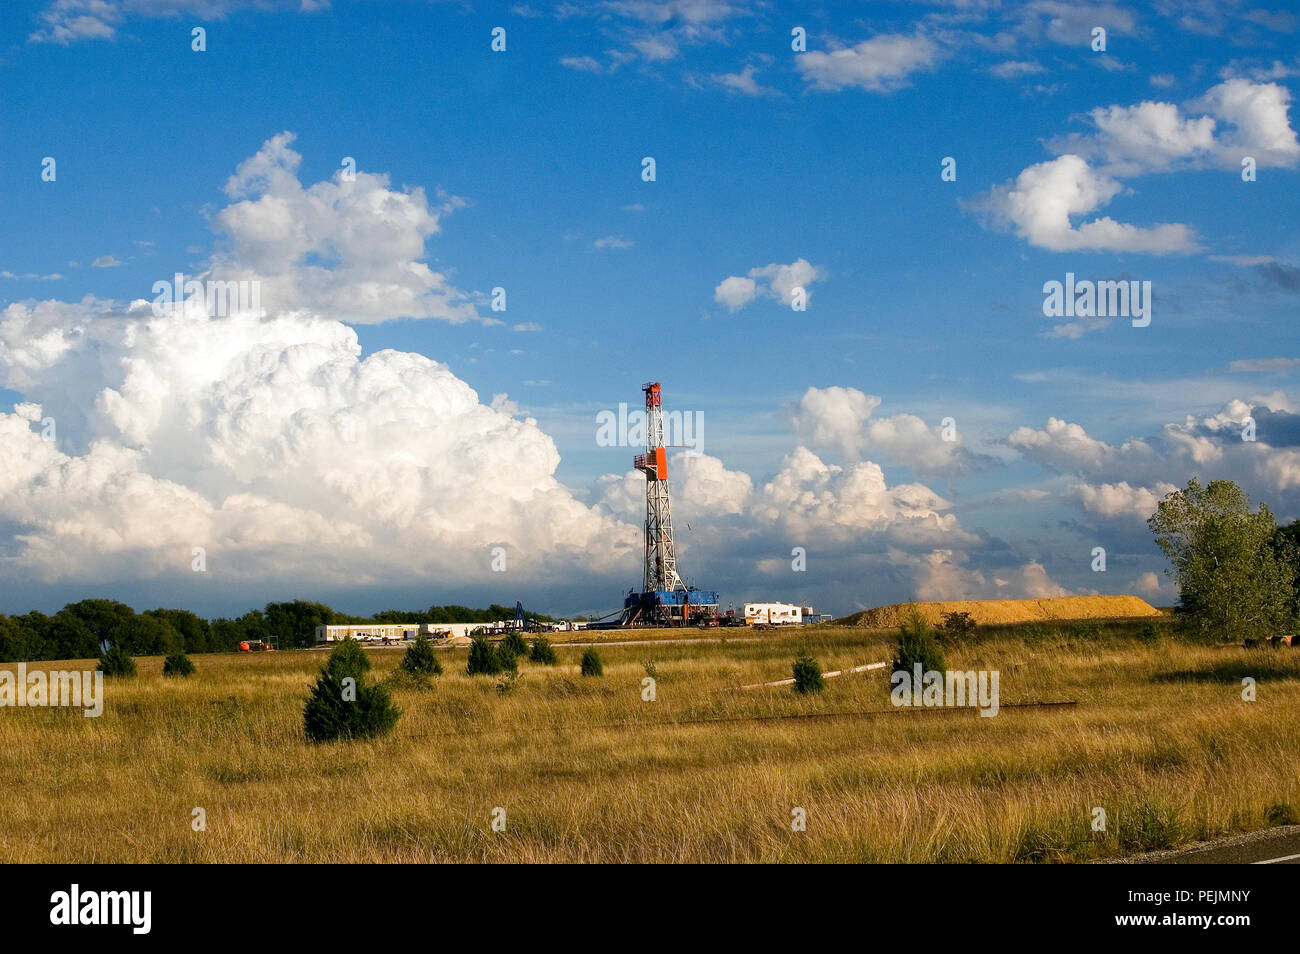 Drill baby drill, Texas increased drilling with new technology from high-fracturing wells and horizontal drilling. Stock Photo